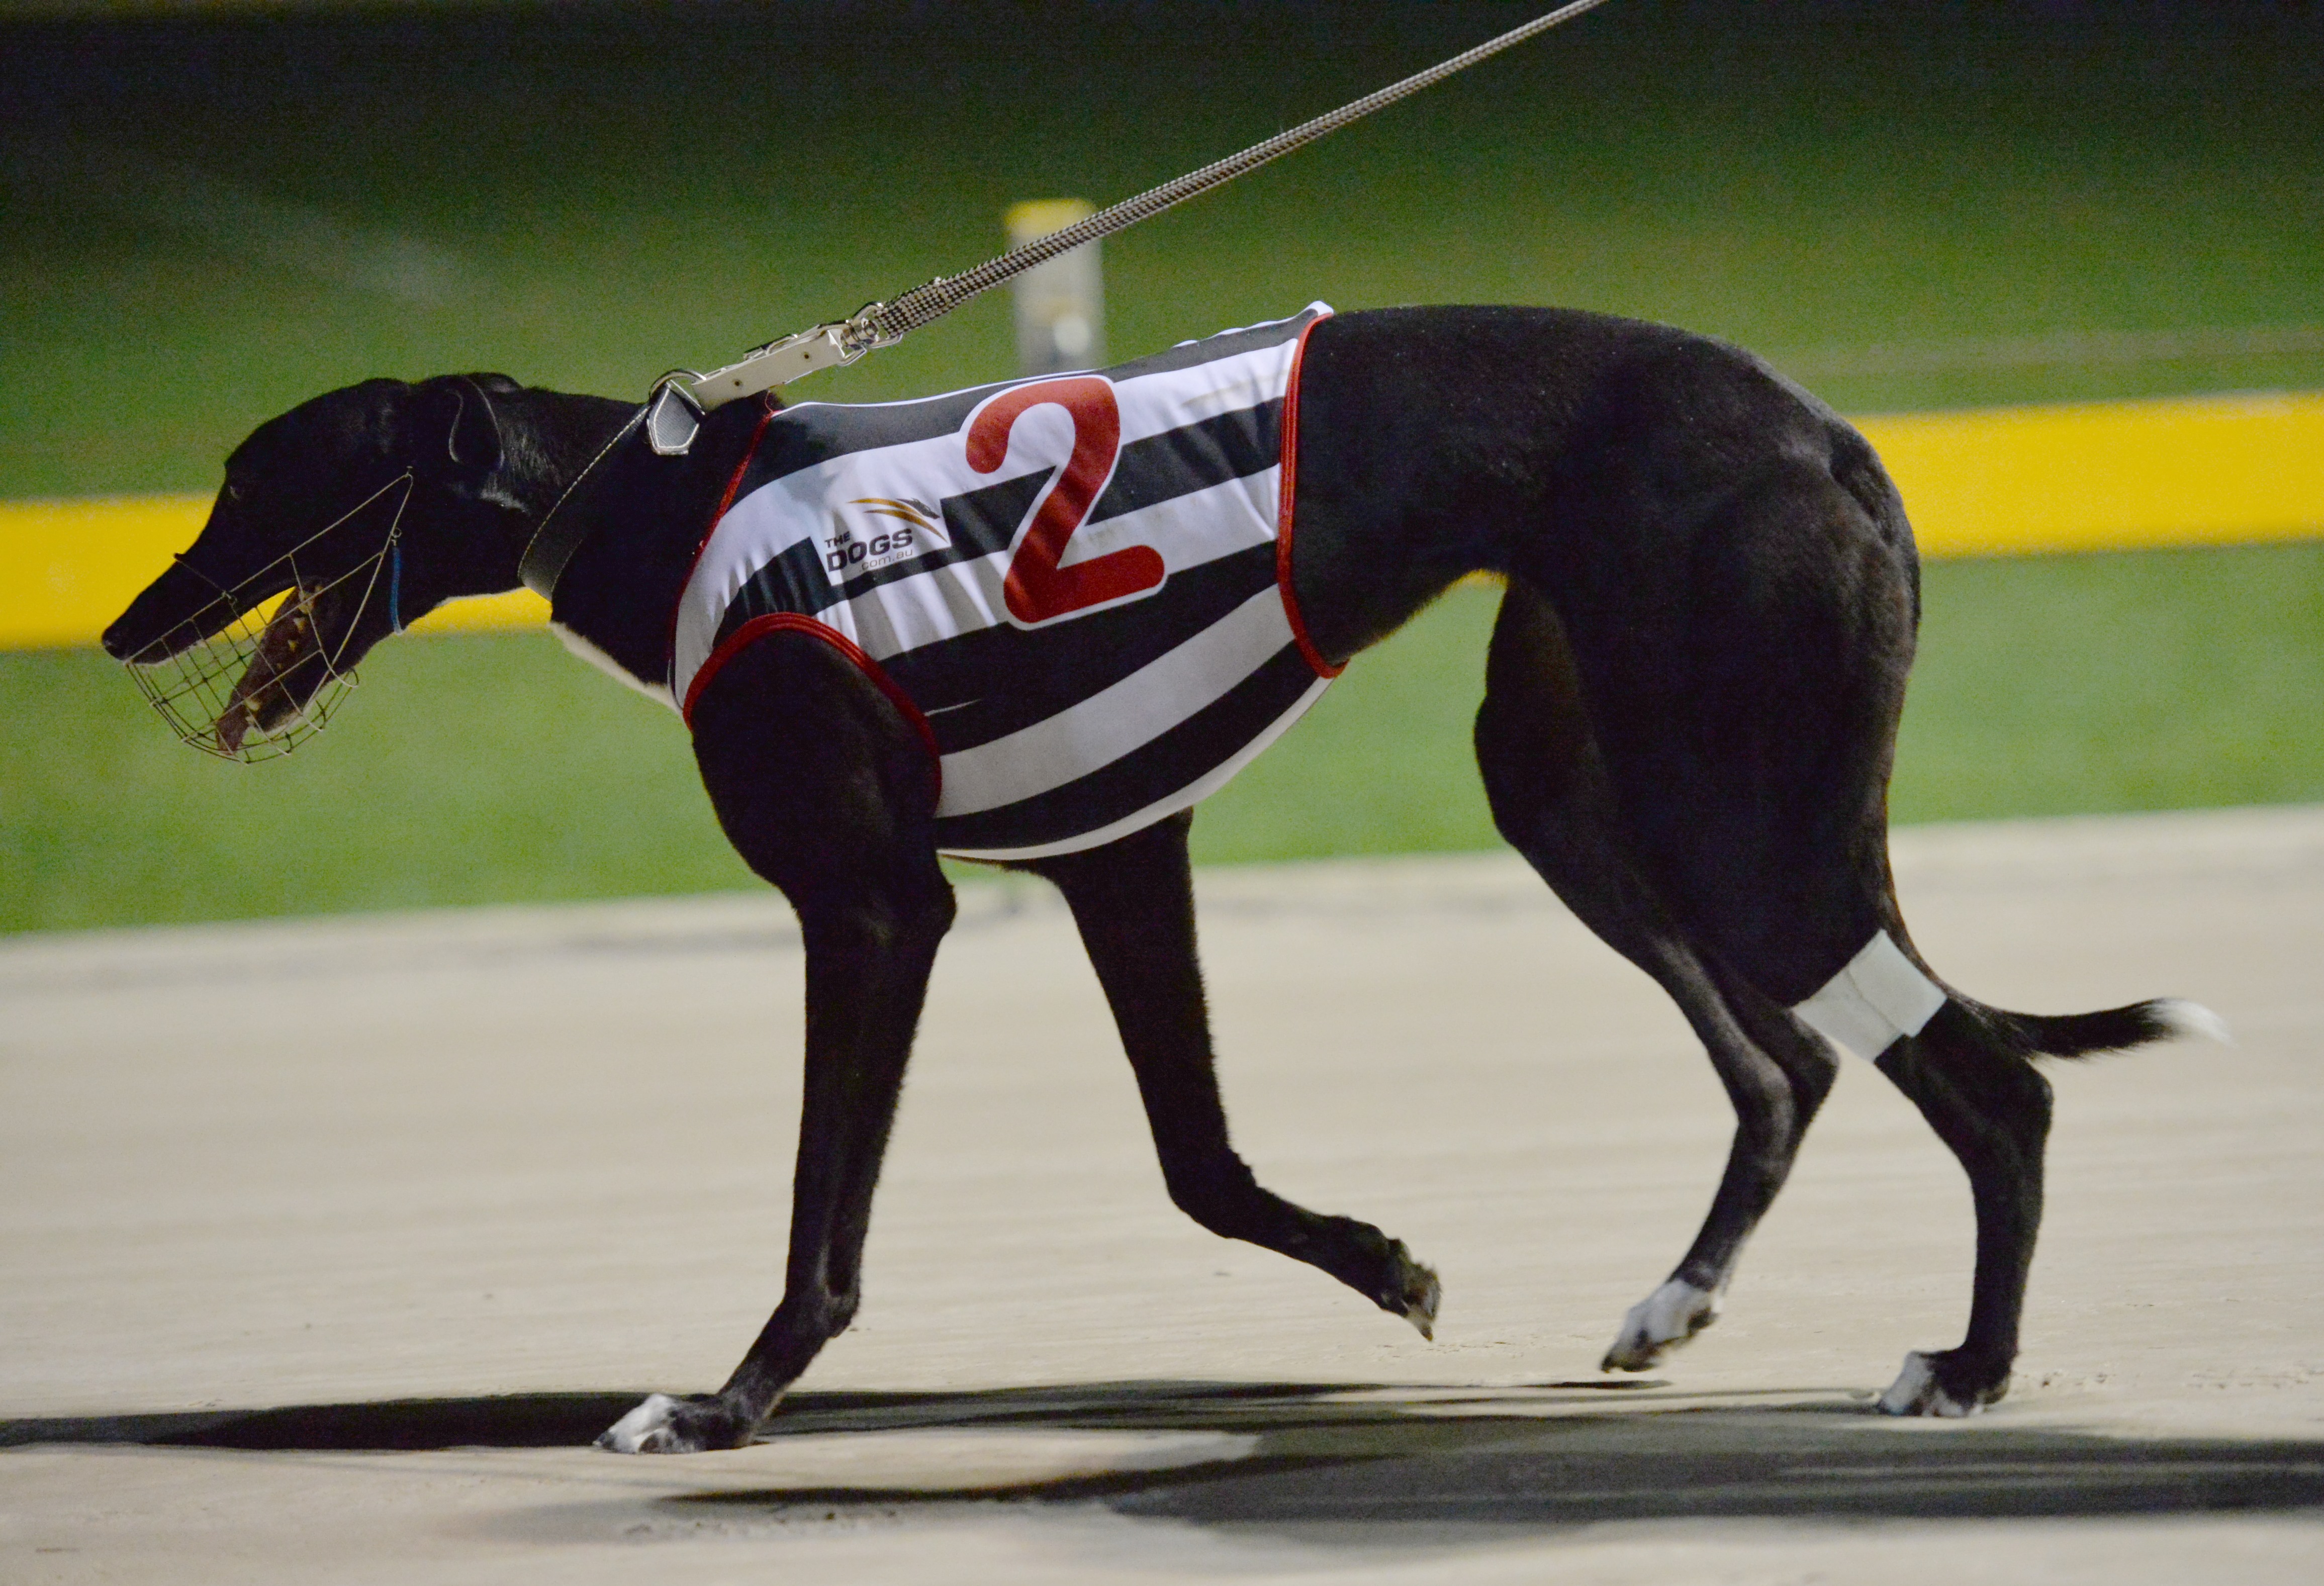 In this photo taken on August 2, 2014 shows a greyhound being paraded by its owner before a race at Wentworth Park in Sydney. Australia's greyhound industry was reeling on July 7, 2016 after the state of New South Wales banned the sport after a string of scandals including "live baiting" and the slaughter of tens of thousands of dogs. / AFP PHOTO / PETER PARKS / IMAGE STRICTLY FOR EDITORIAL USE - STRICTLY NO COMMERCIAL USE